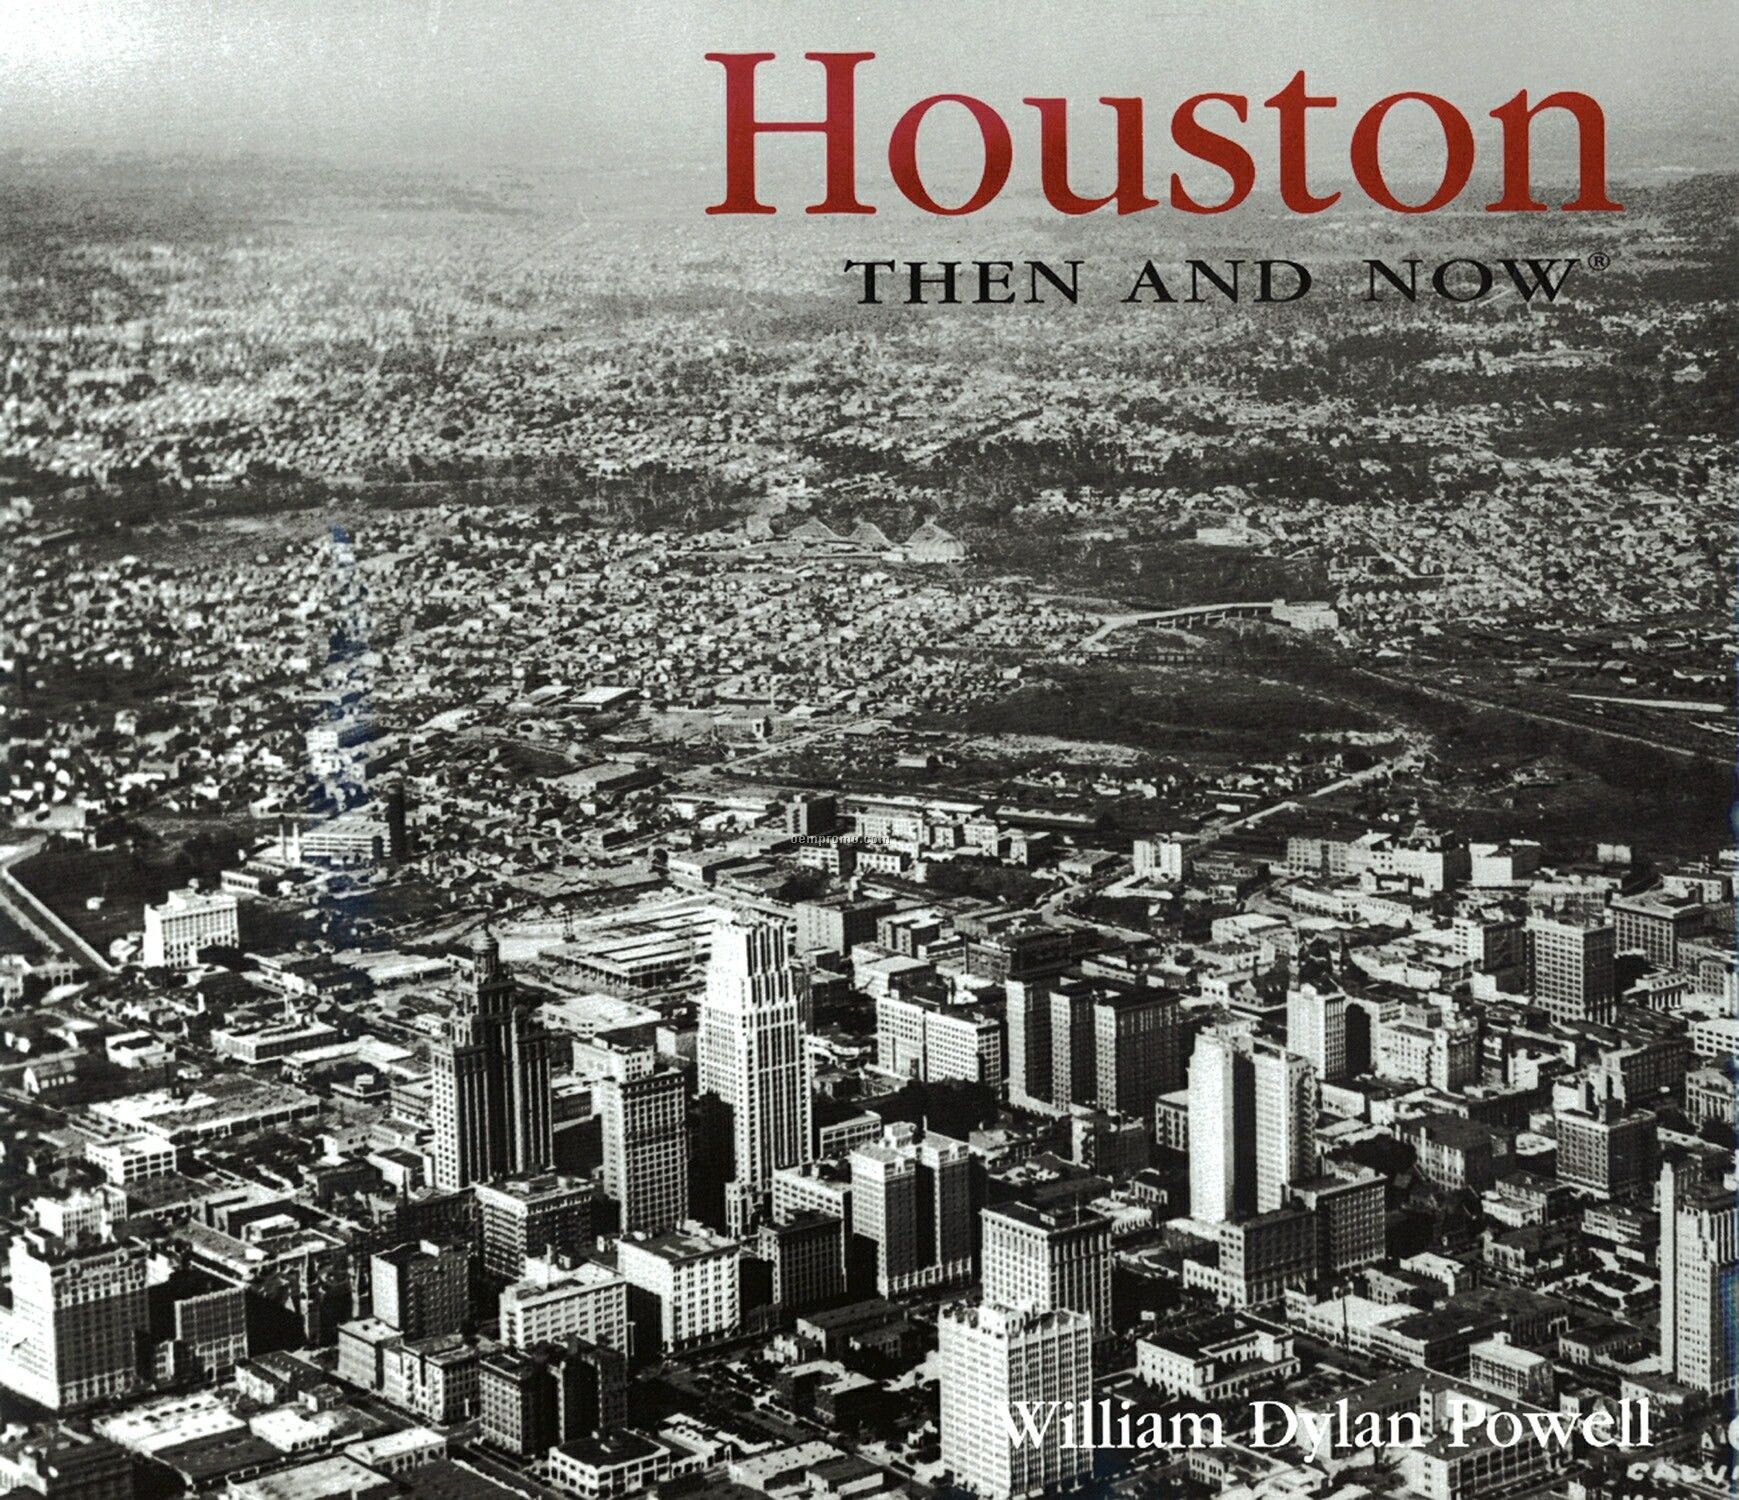 Houston Then & Now City Series Book - Hardcover Edition